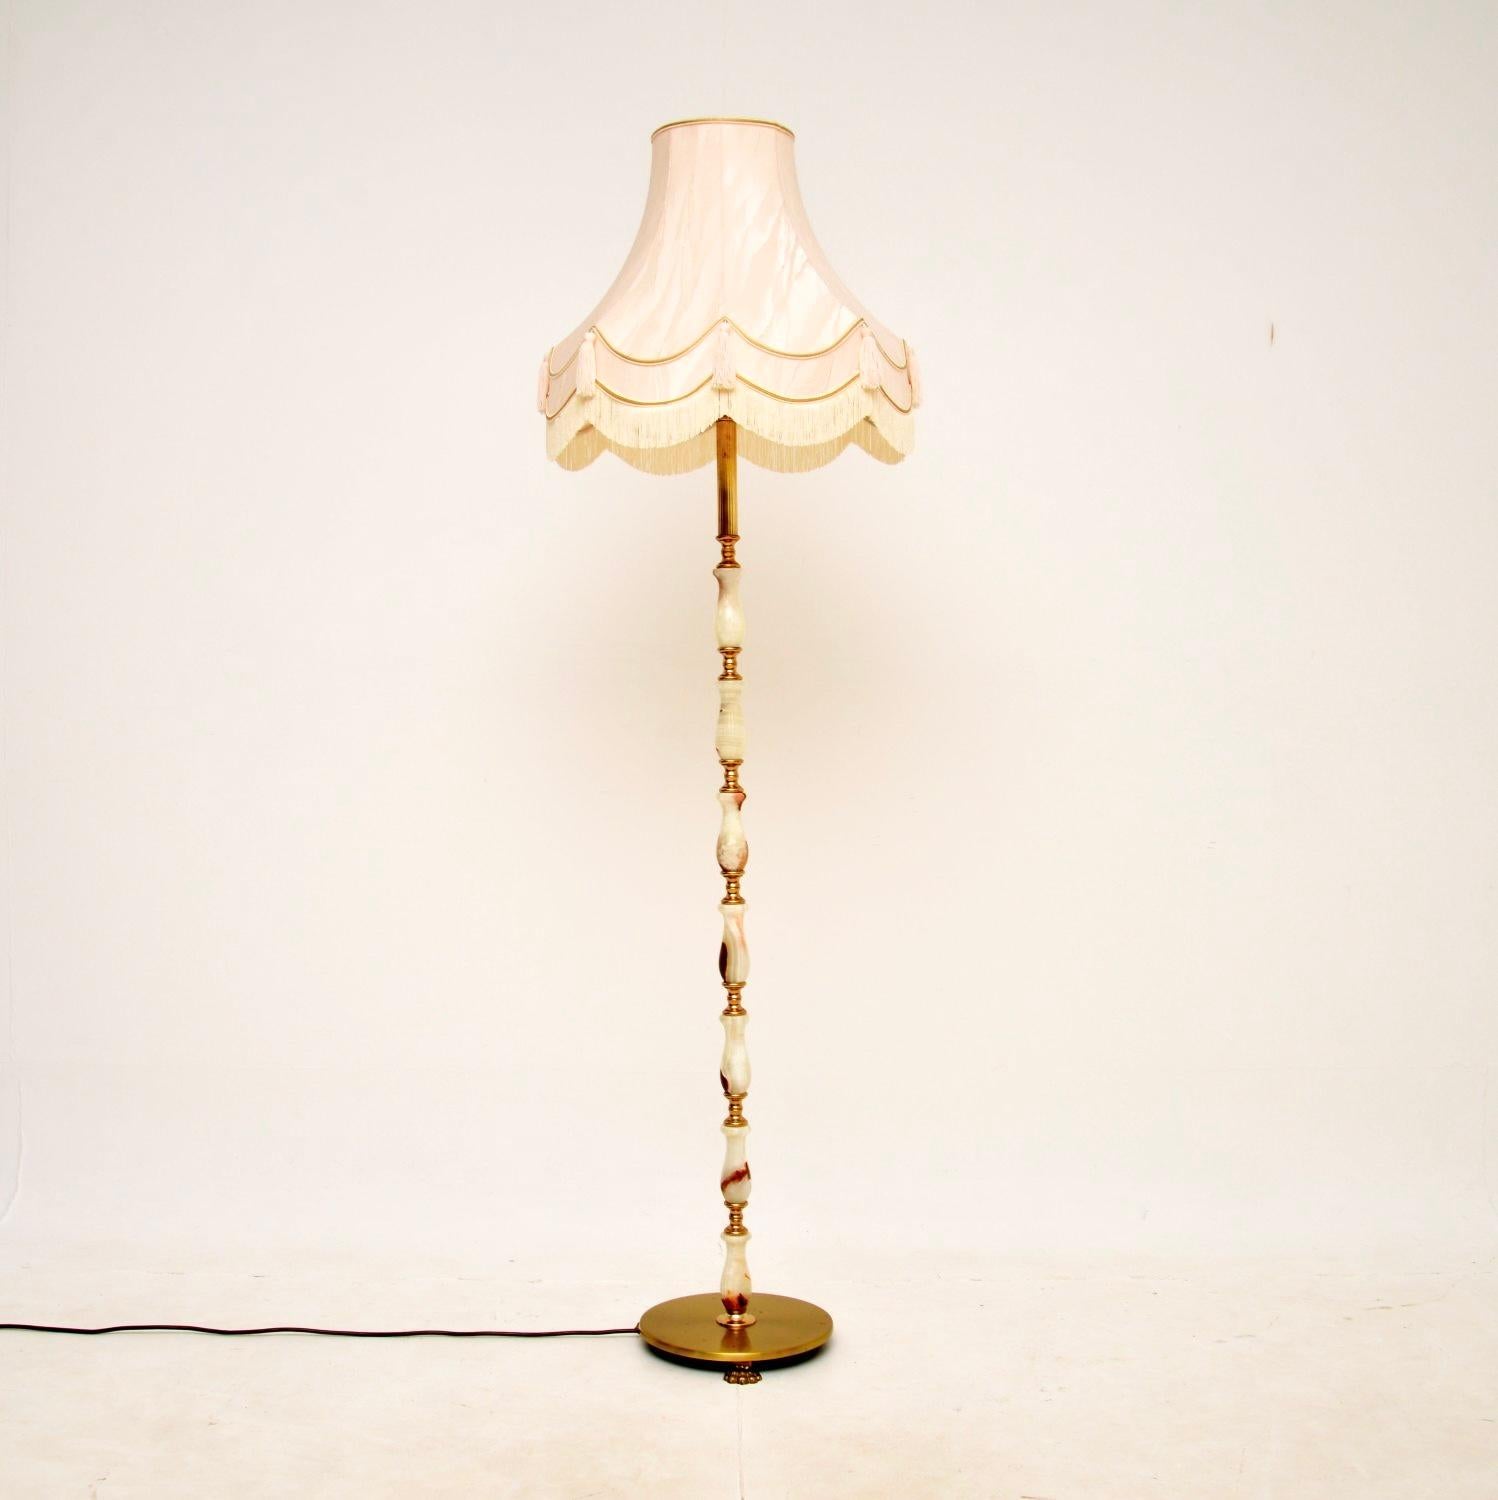 A beautiful antique French onyx and brass floor lamp. This was made in France, it dates from around the 1930’s.

It is of super quality, the stand is articulated with solid onyx and brass, sitting on a brass base with hairy paw feet. The shade that